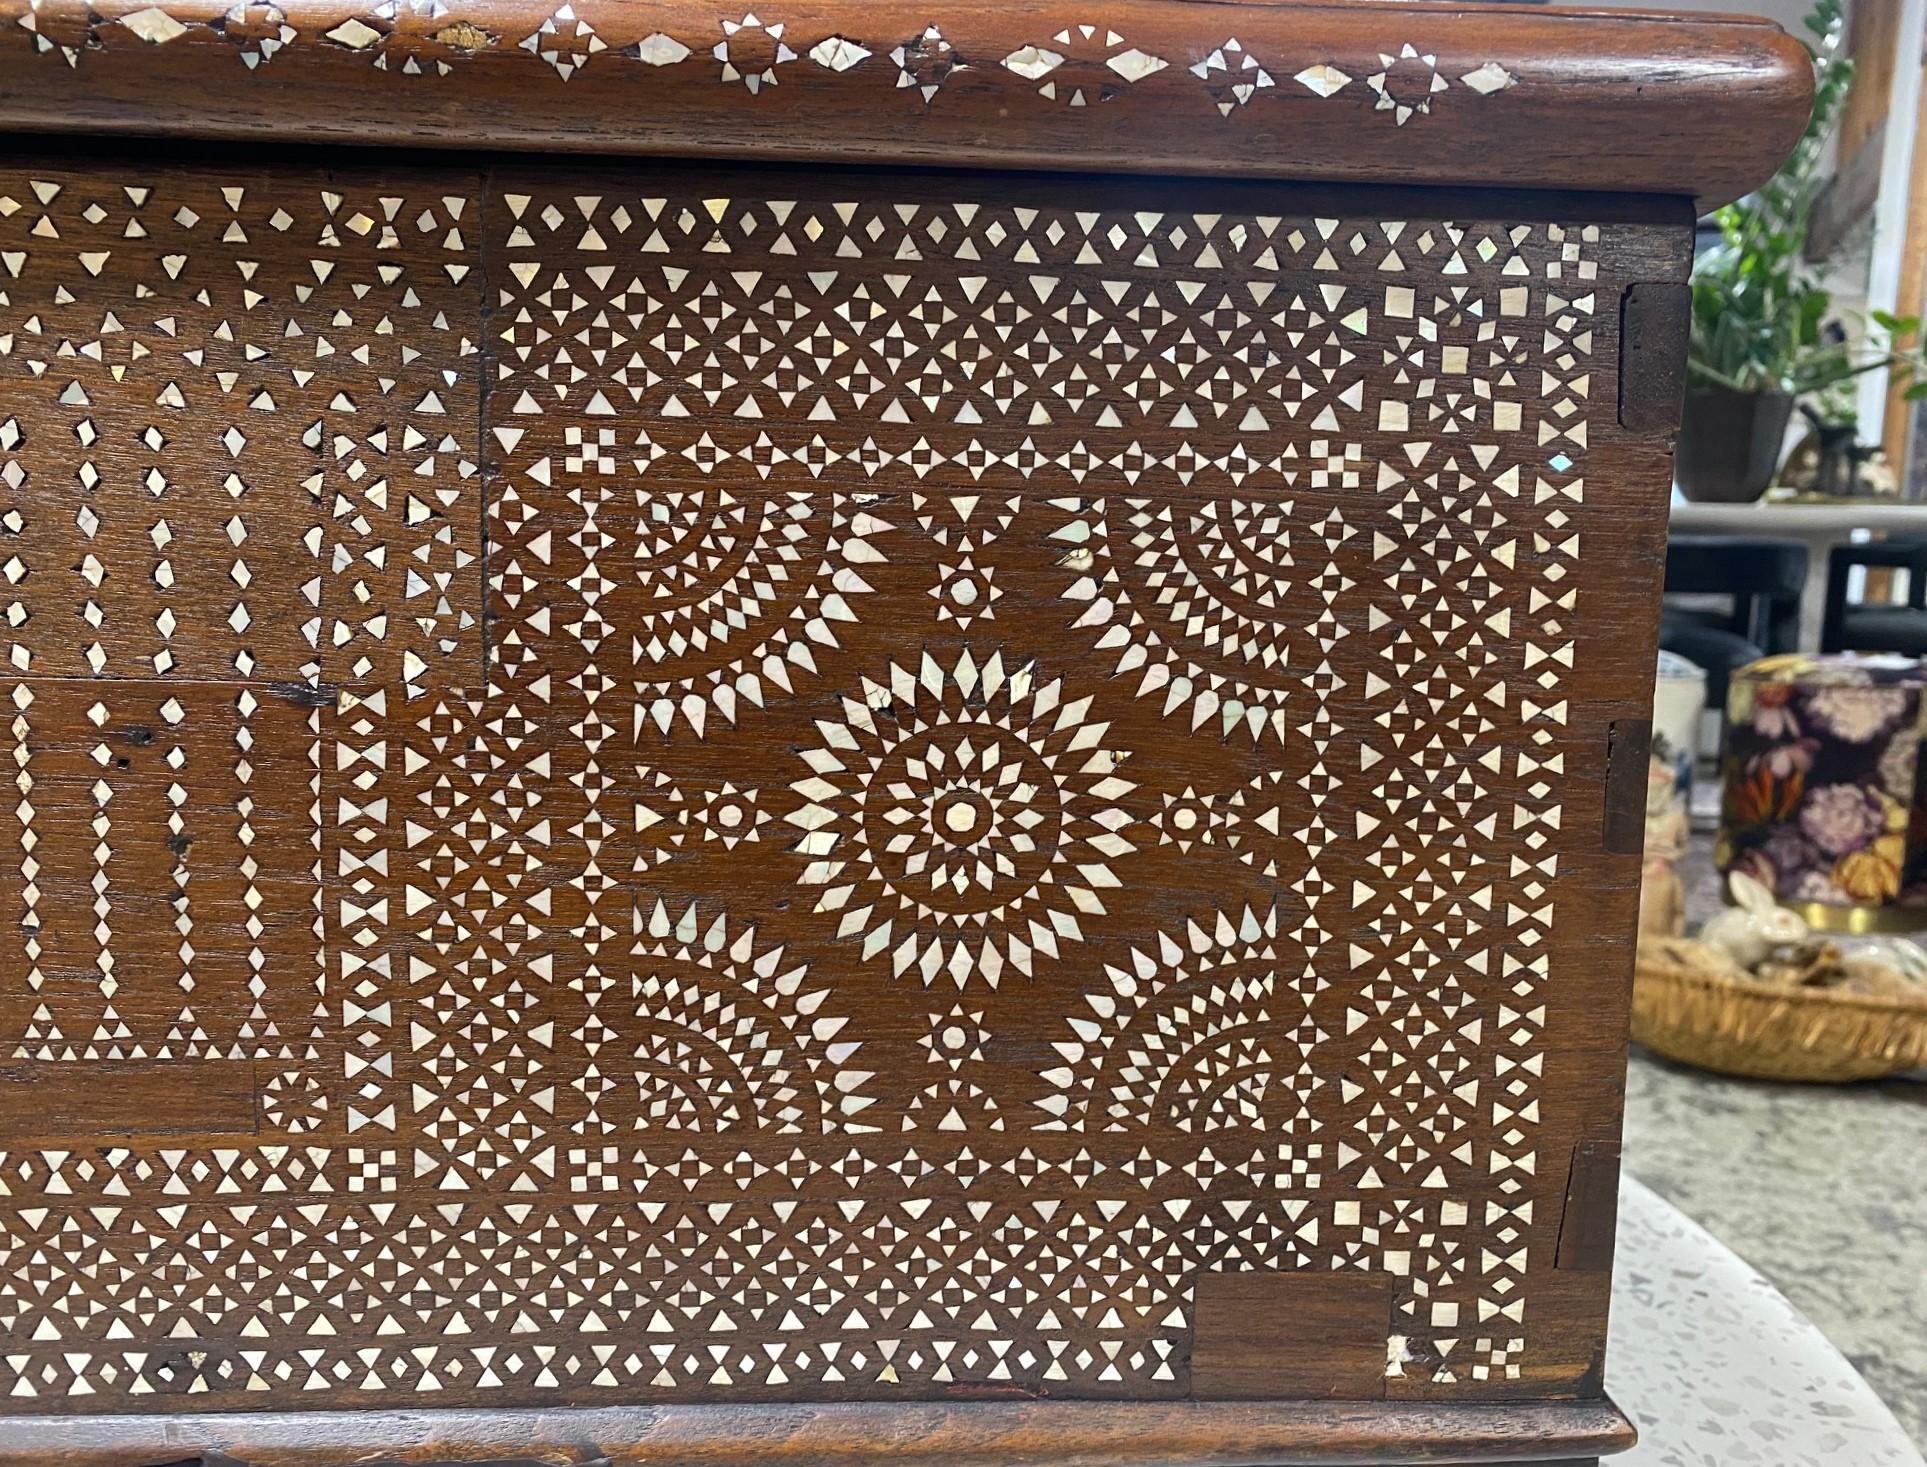 Hand-Crafted Beautiful Moorish Syrian or Asian Inlaid Inlay Wood Box Storage Chest Trunk For Sale